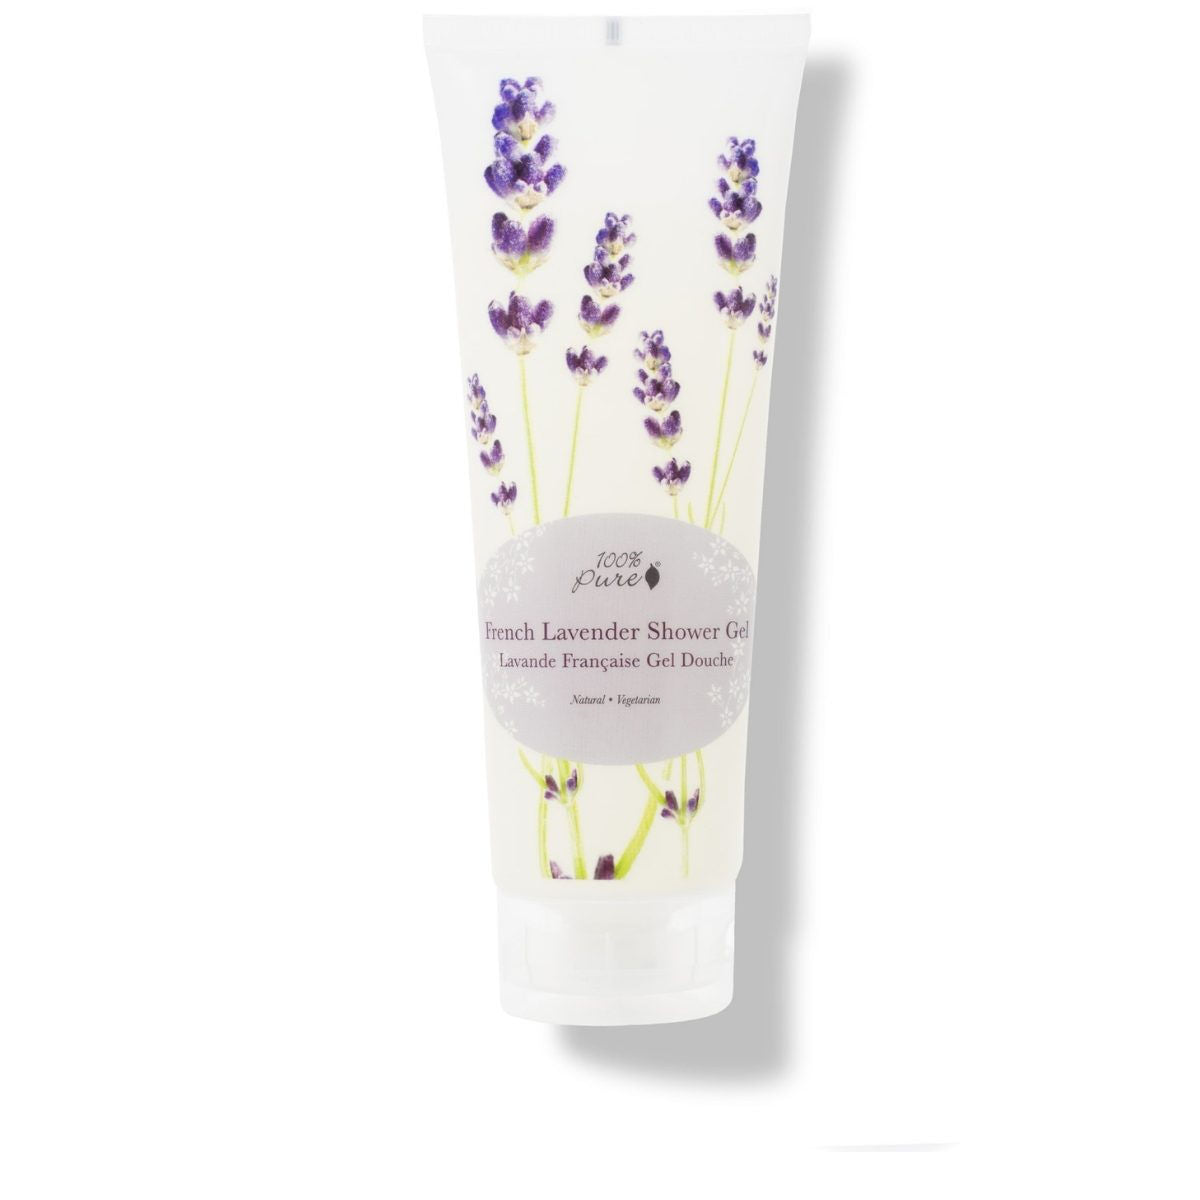 100 Percent Pure French Lavender Shower Gel - 8oz - The Green Kiss